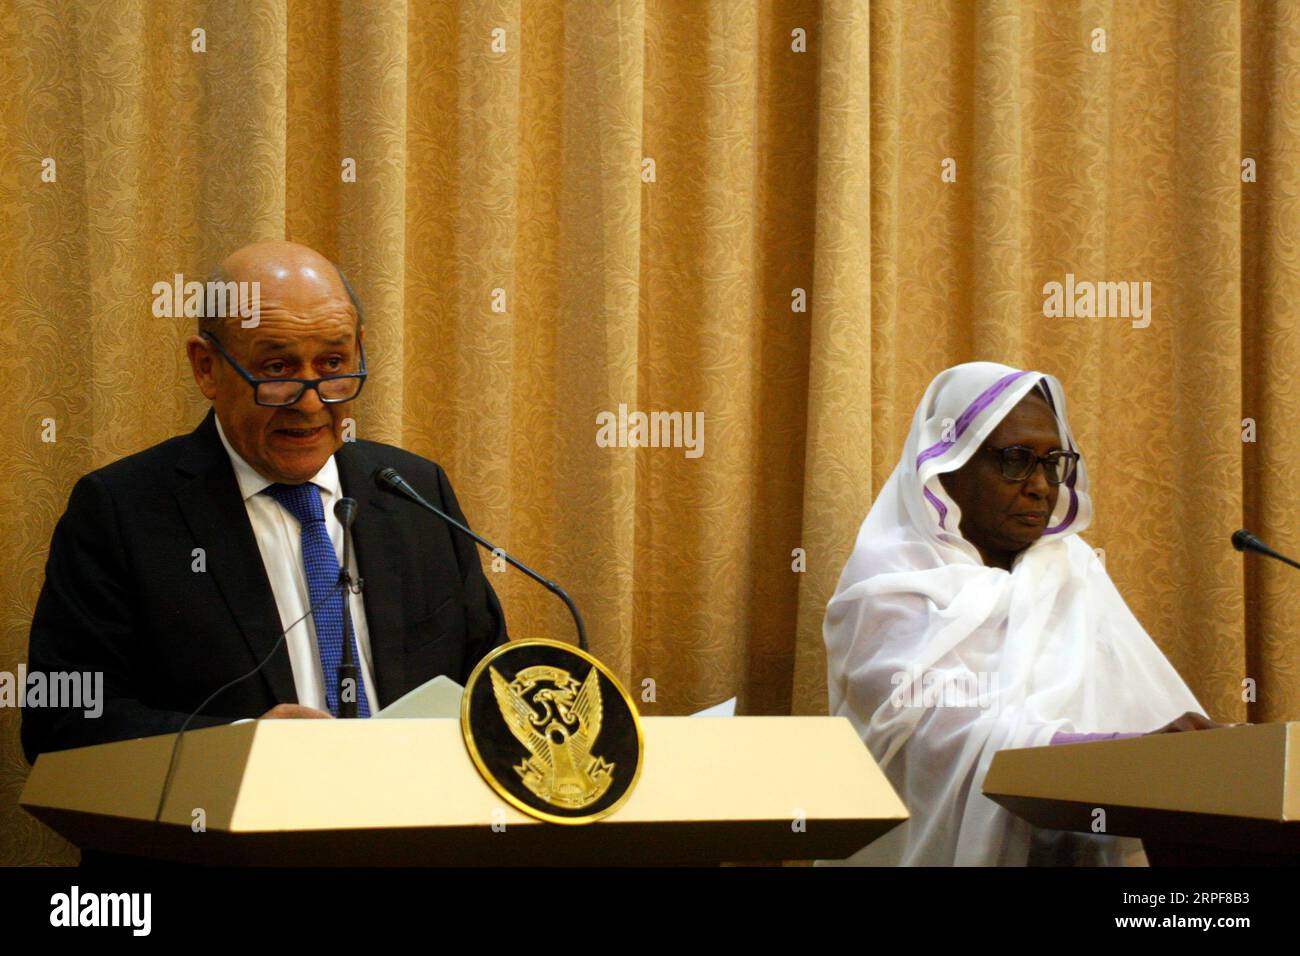 (190916) -- KHARTOUM, Sept. 16, 2019 -- French Foreign Minister Jean-Yves Le Drian (L) and Sudan s Foreign Minister Asma Mohamed Abdullah attend a joint press conference in Khartoum, Sudan, on Sept. 16, 2019. French Foreign Minister Jean-Yves Le Drian on Monday voiced his country s support for the current transitional period in Sudan to achieve peace and justice. ) SUDAN-KHARTOUM-FRANCE-FM-VISIT MohamedxKhidir PUBLICATIONxNOTxINxCHN Stock Photo